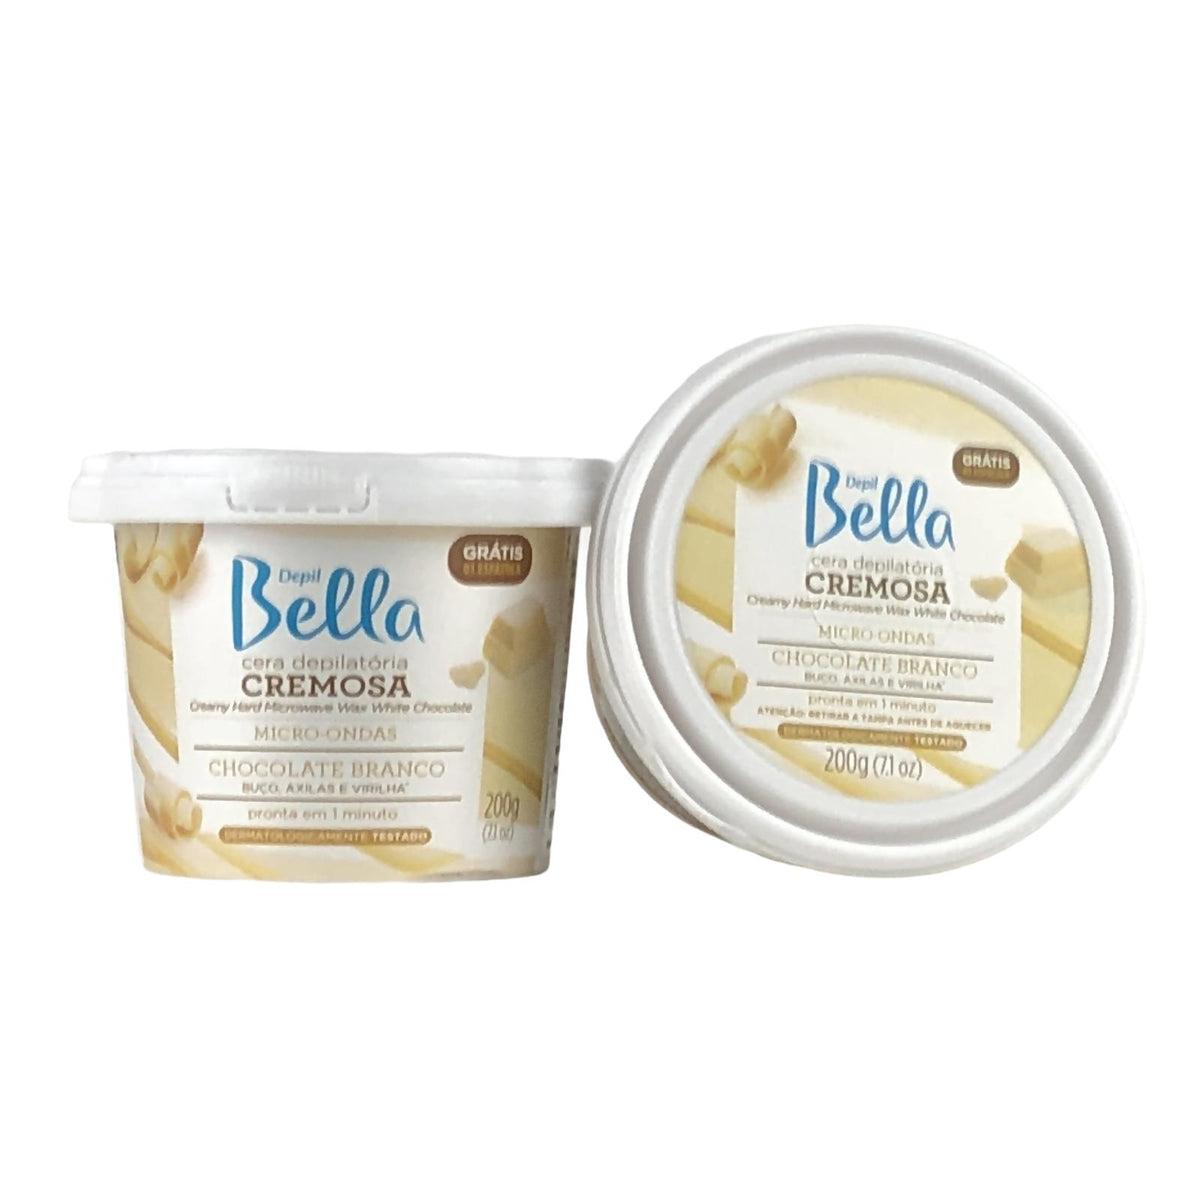 Depil Bella Hair Removal Bundle - 2 White Chocolate & 2 Green Microwave Hard Wax | 100 Wooden Wax Sticks | 2 Pre-Wax Astringent | 2 Wax-Off Oil 